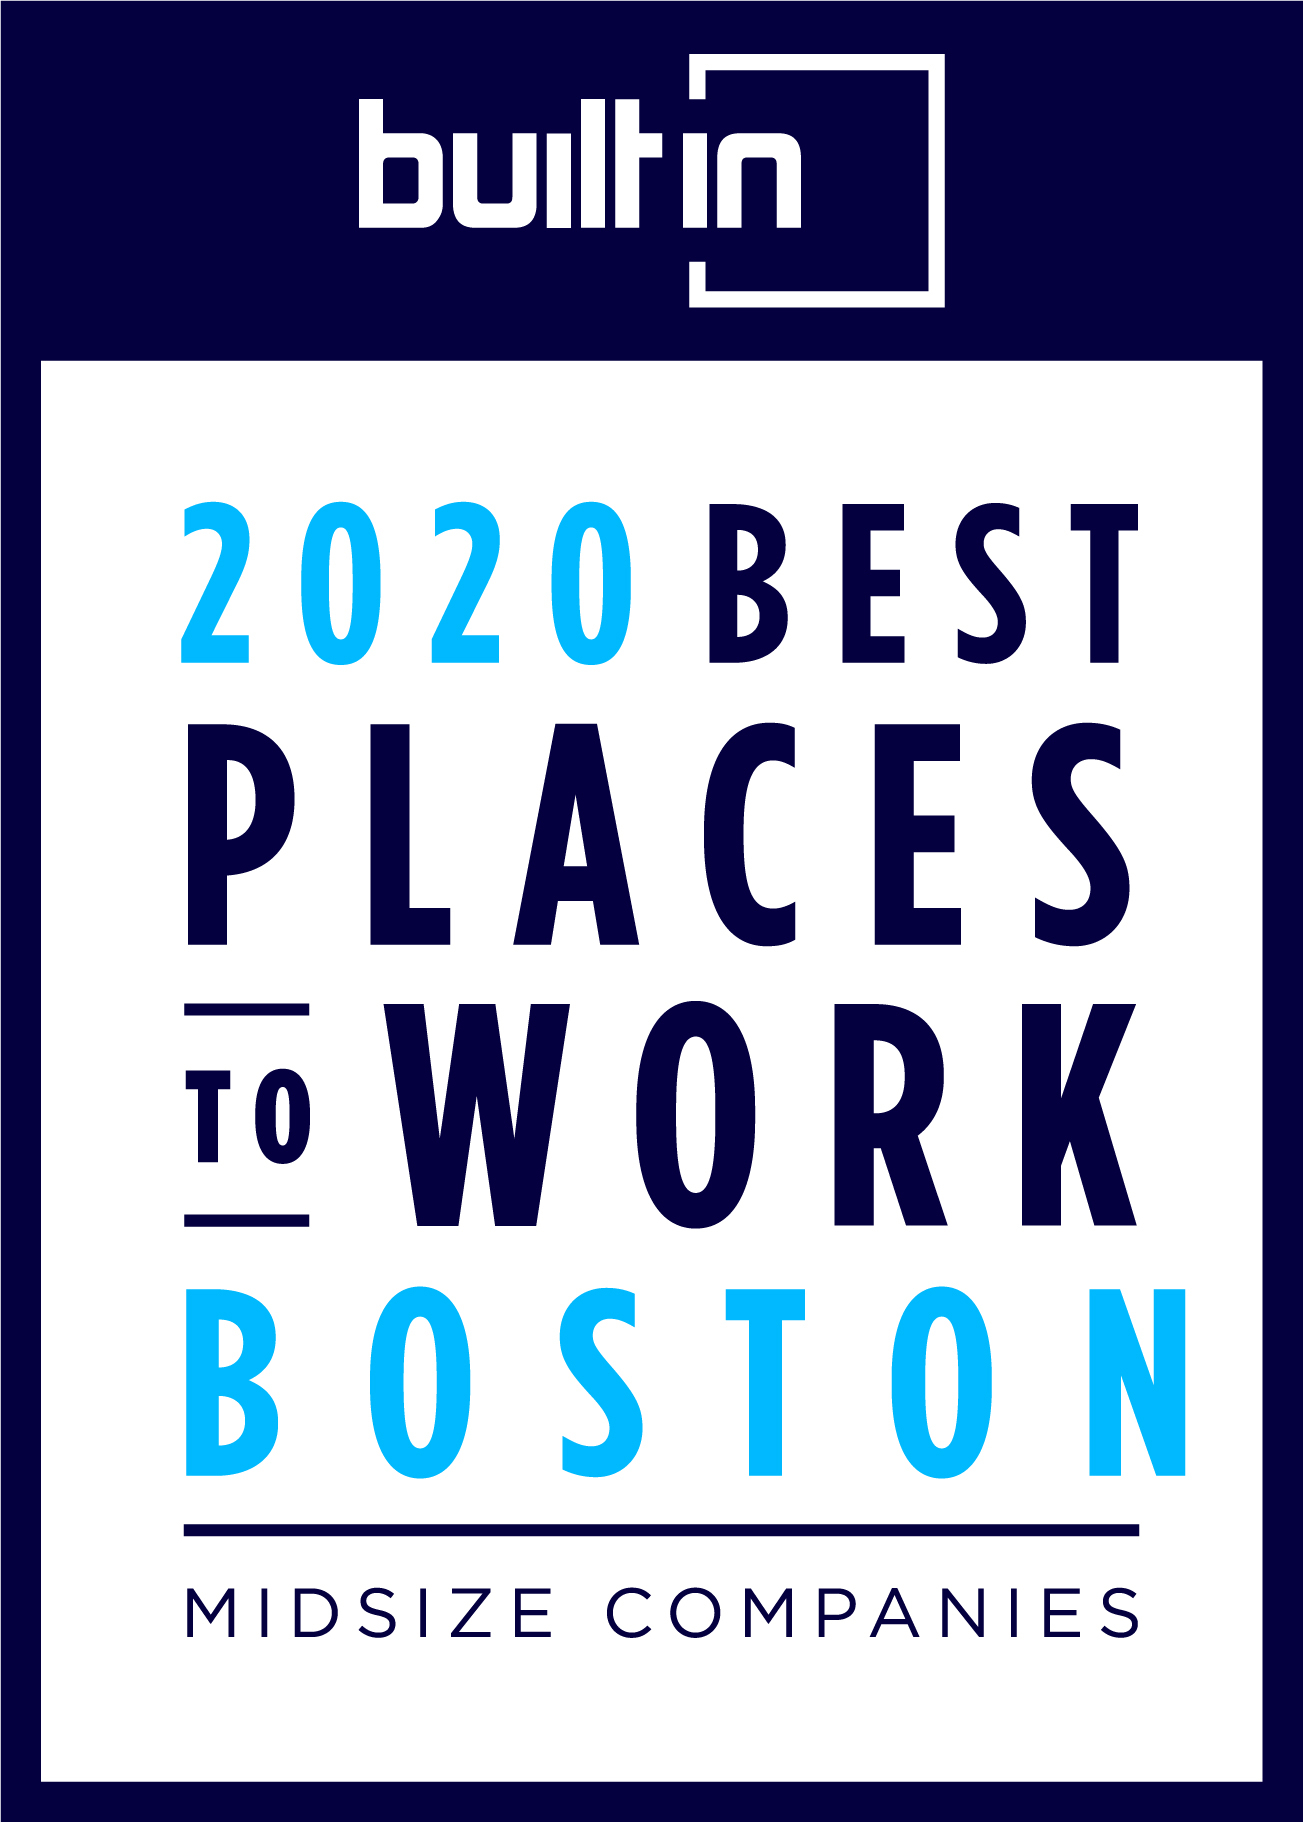 Built in Boston Best Places to Work
Midsize Companies